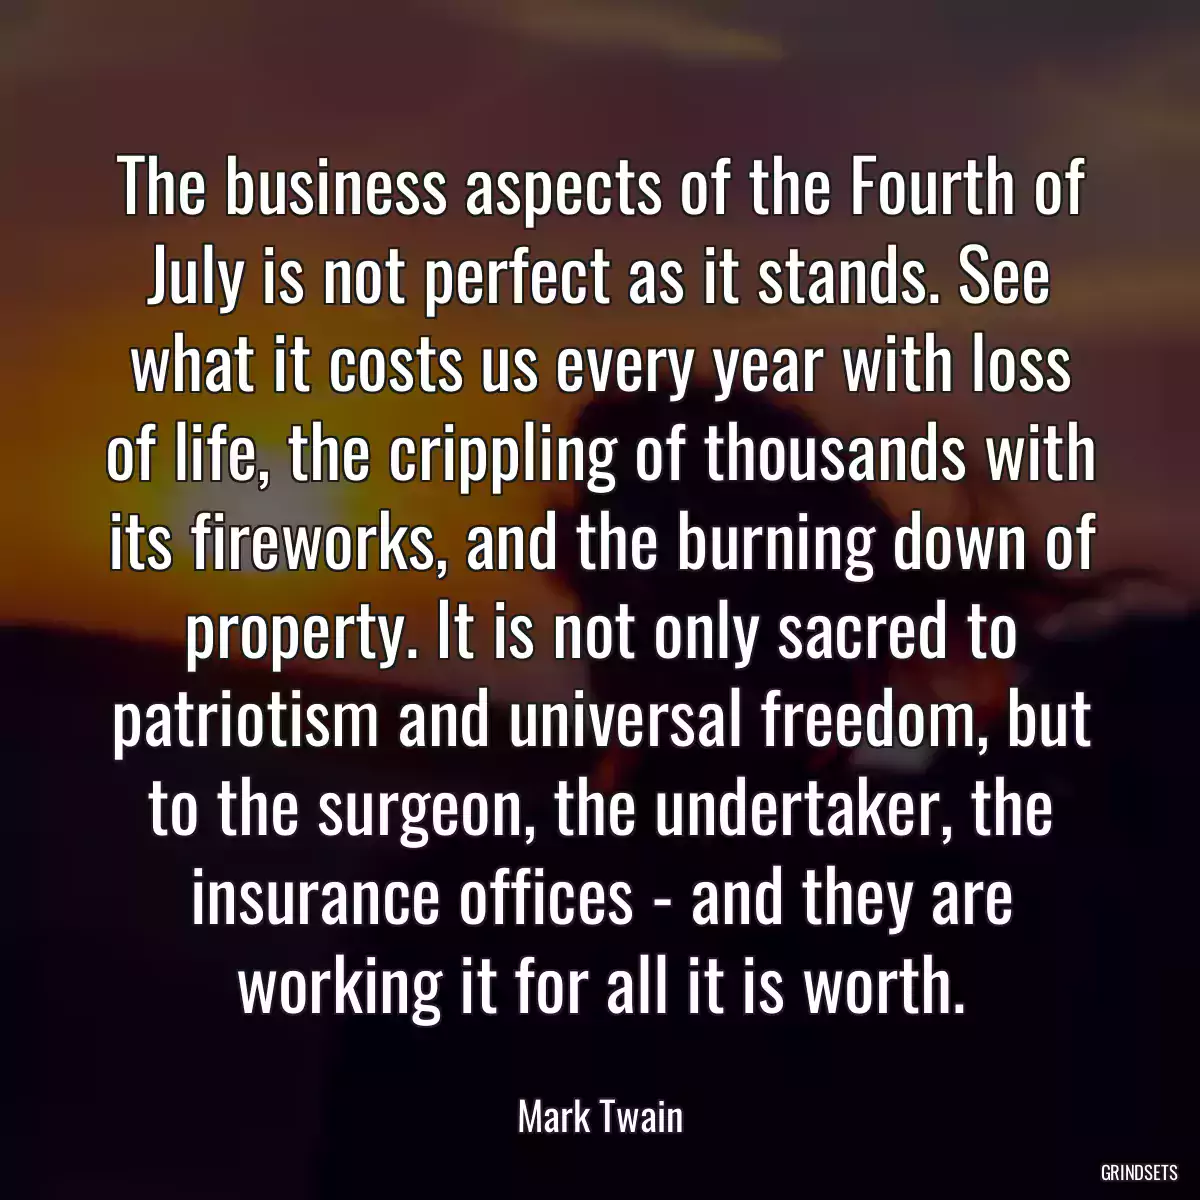 The business aspects of the Fourth of July is not perfect as it stands. See what it costs us every year with loss of life, the crippling of thousands with its fireworks, and the burning down of property. It is not only sacred to patriotism and universal freedom, but to the surgeon, the undertaker, the insurance offices - and they are working it for all it is worth.